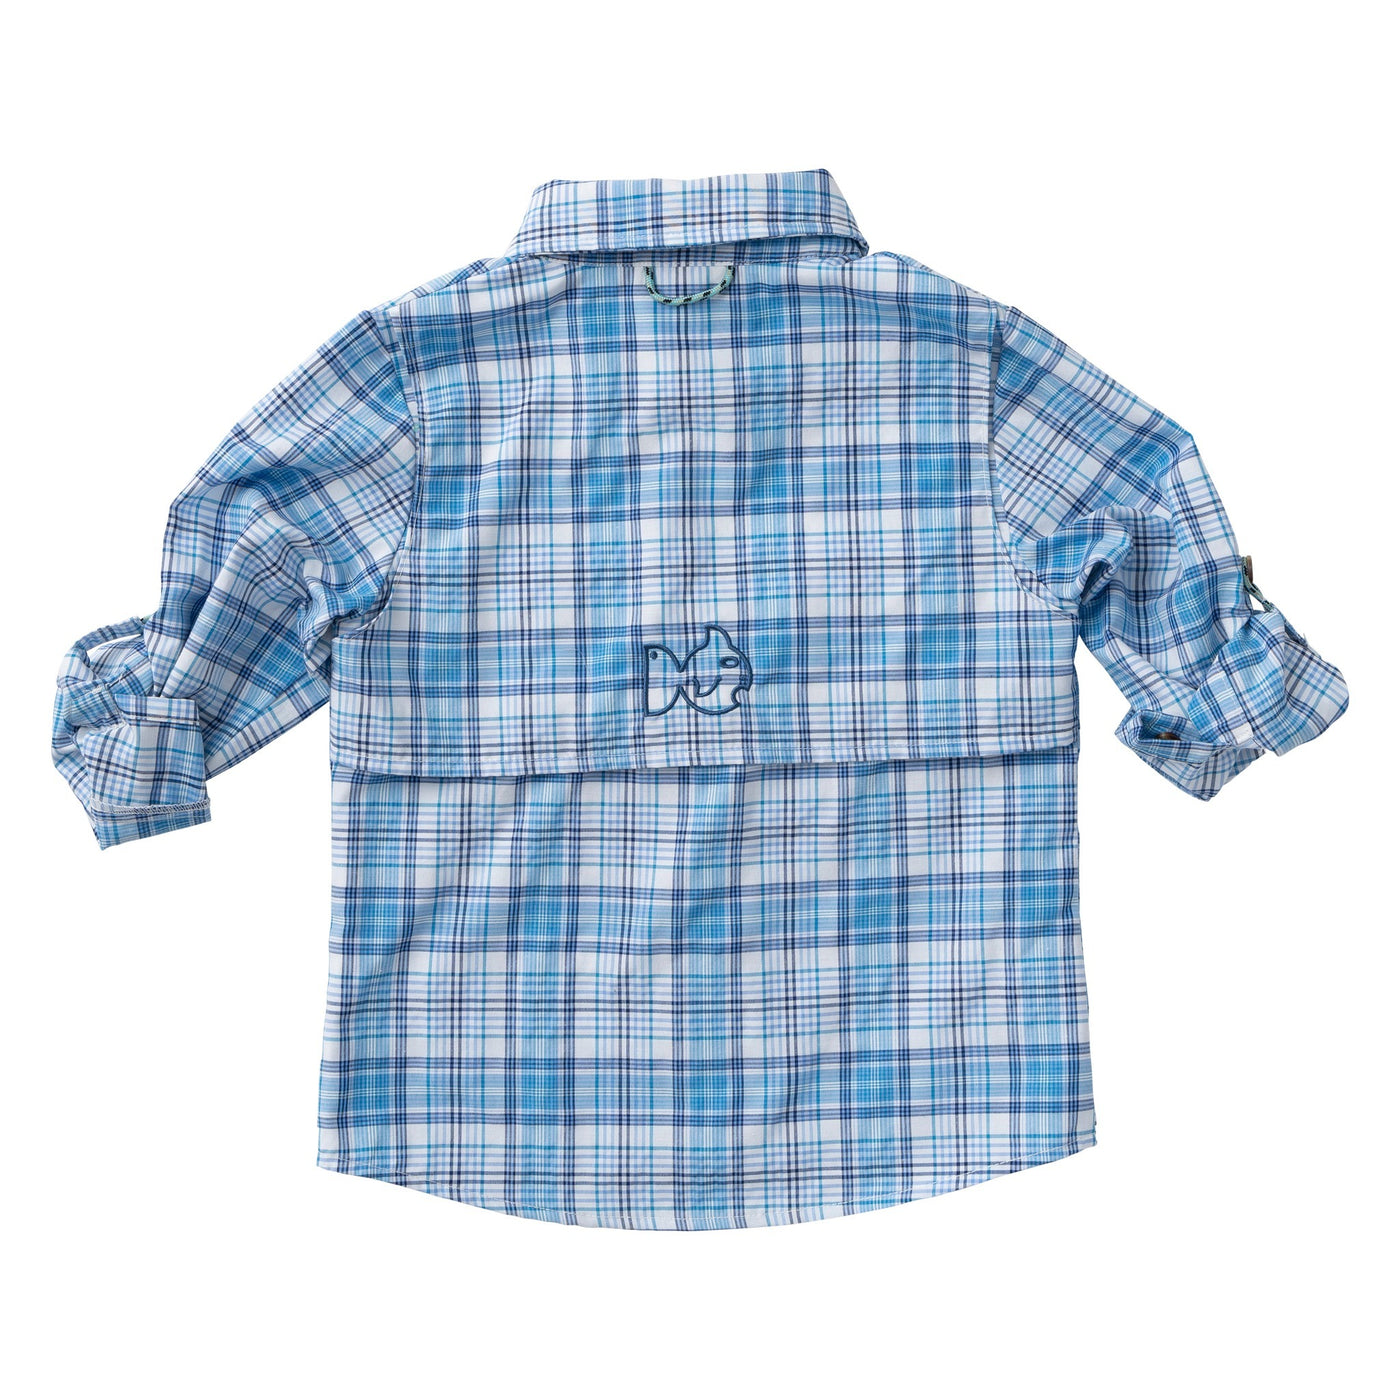 Founders Fishing Shirt Ethereal Blue Plaid